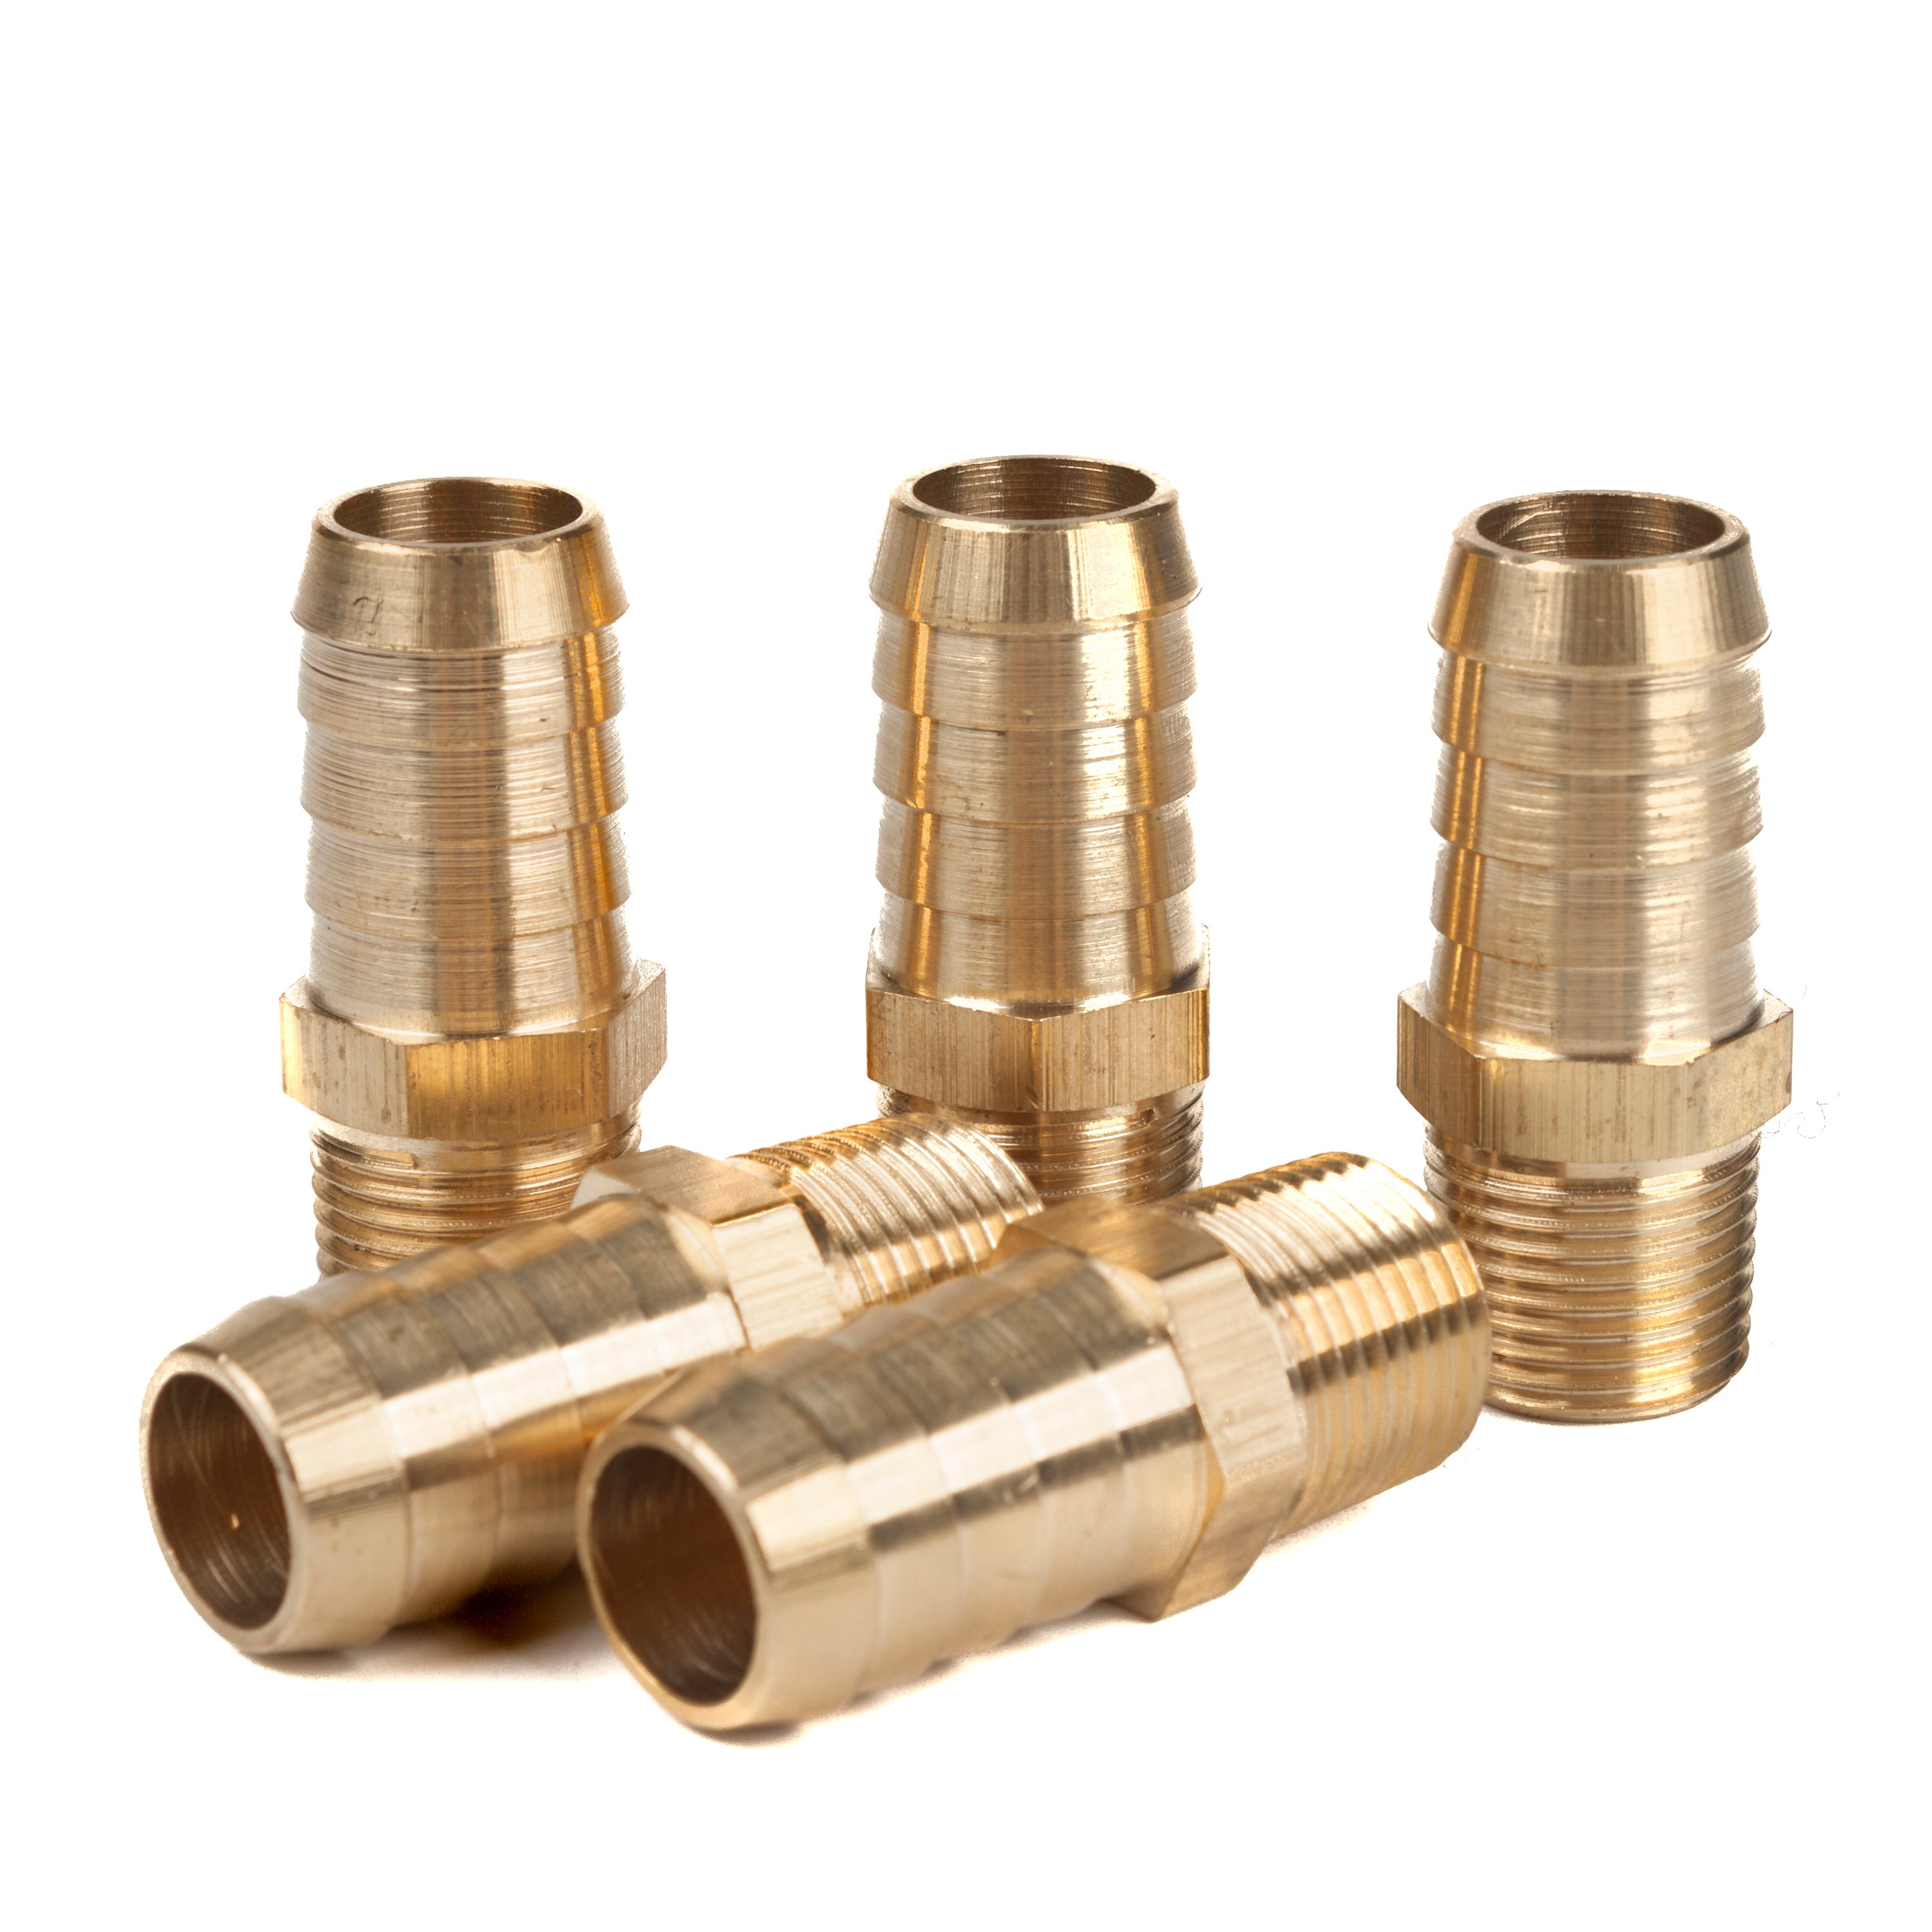 LTWFITTING Brass Barb Fitting Coupler 5/8-Inch Hose ID x 3/8-Inch Male NPT Fuel Gas Water(Pack of 5)